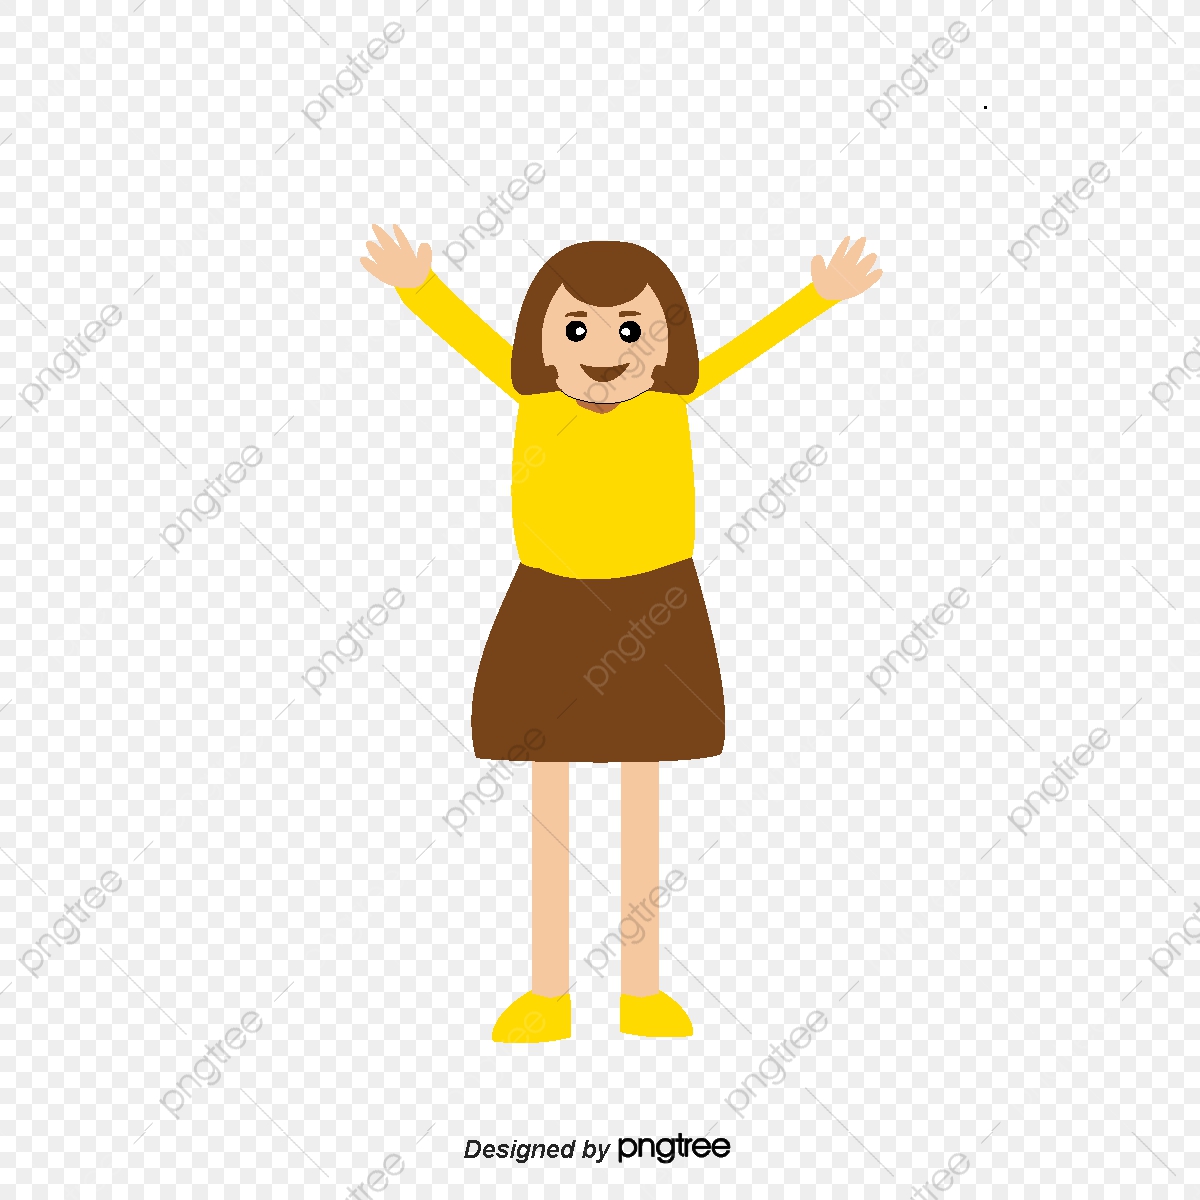 Exercising clipart vector. Stretching exercise character 